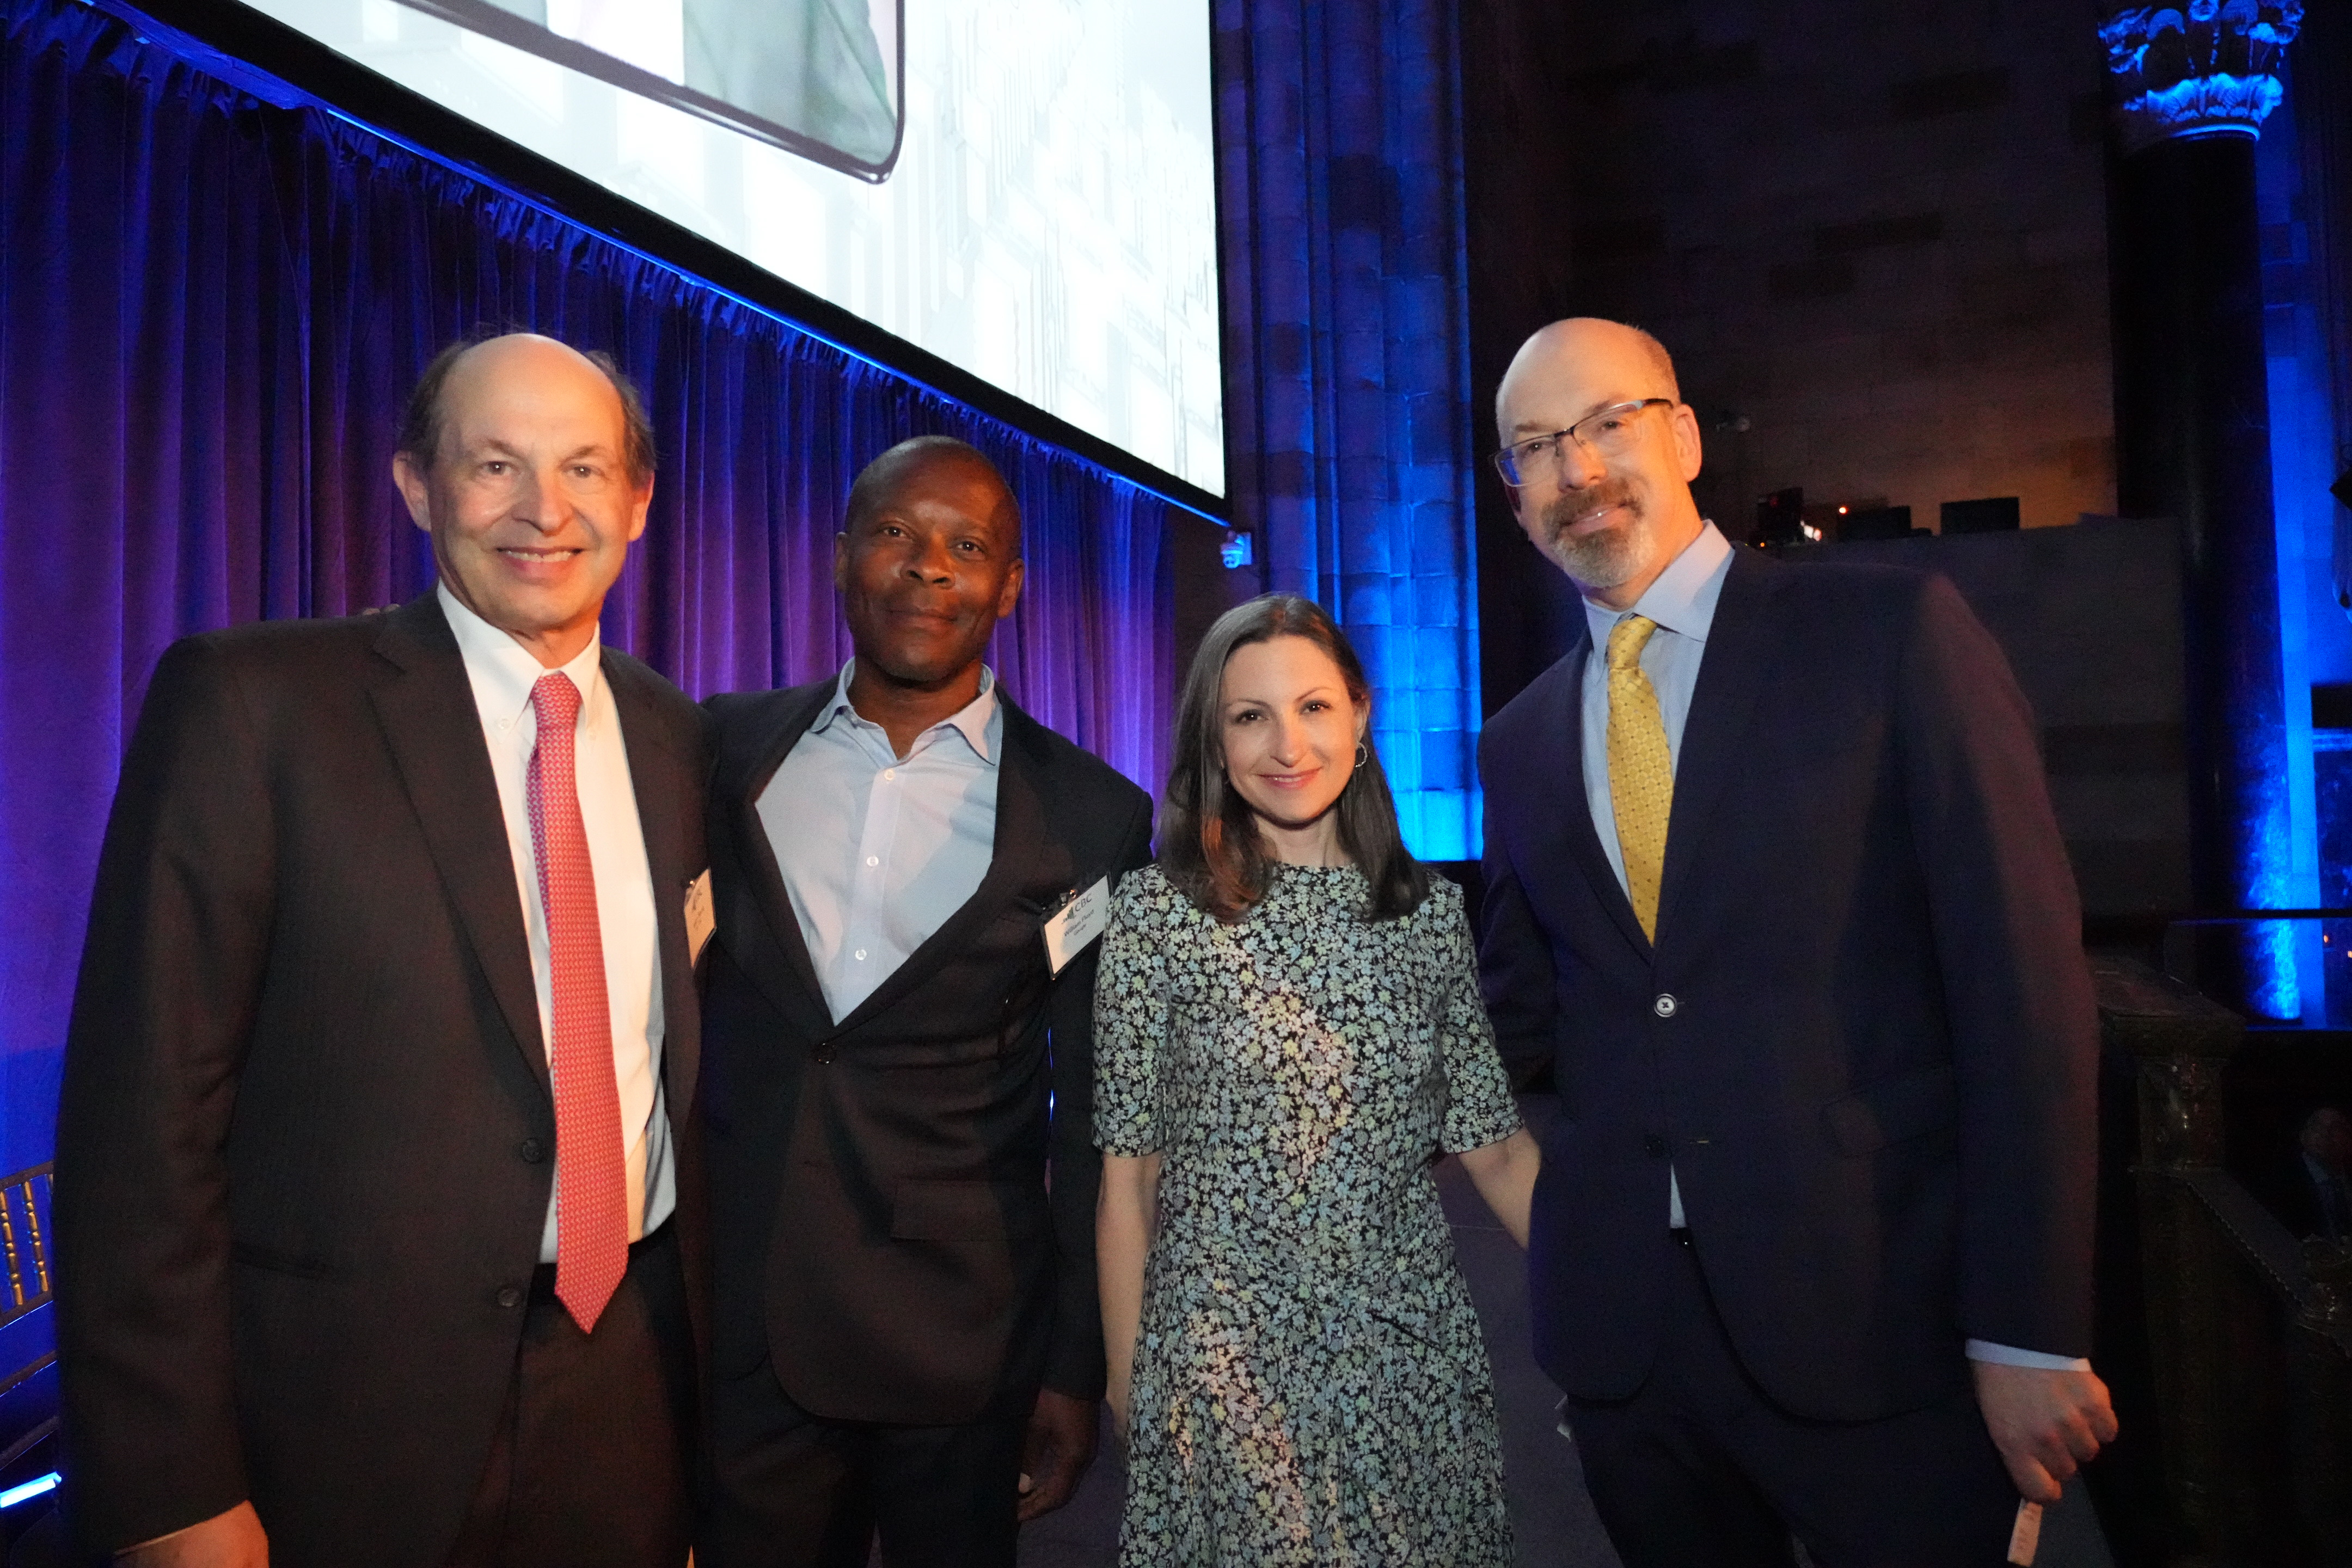 CBC Chair Walter Harris, CBC Vice Chairs William Floyd and Marissa Shorenstein, and Andrew Rein